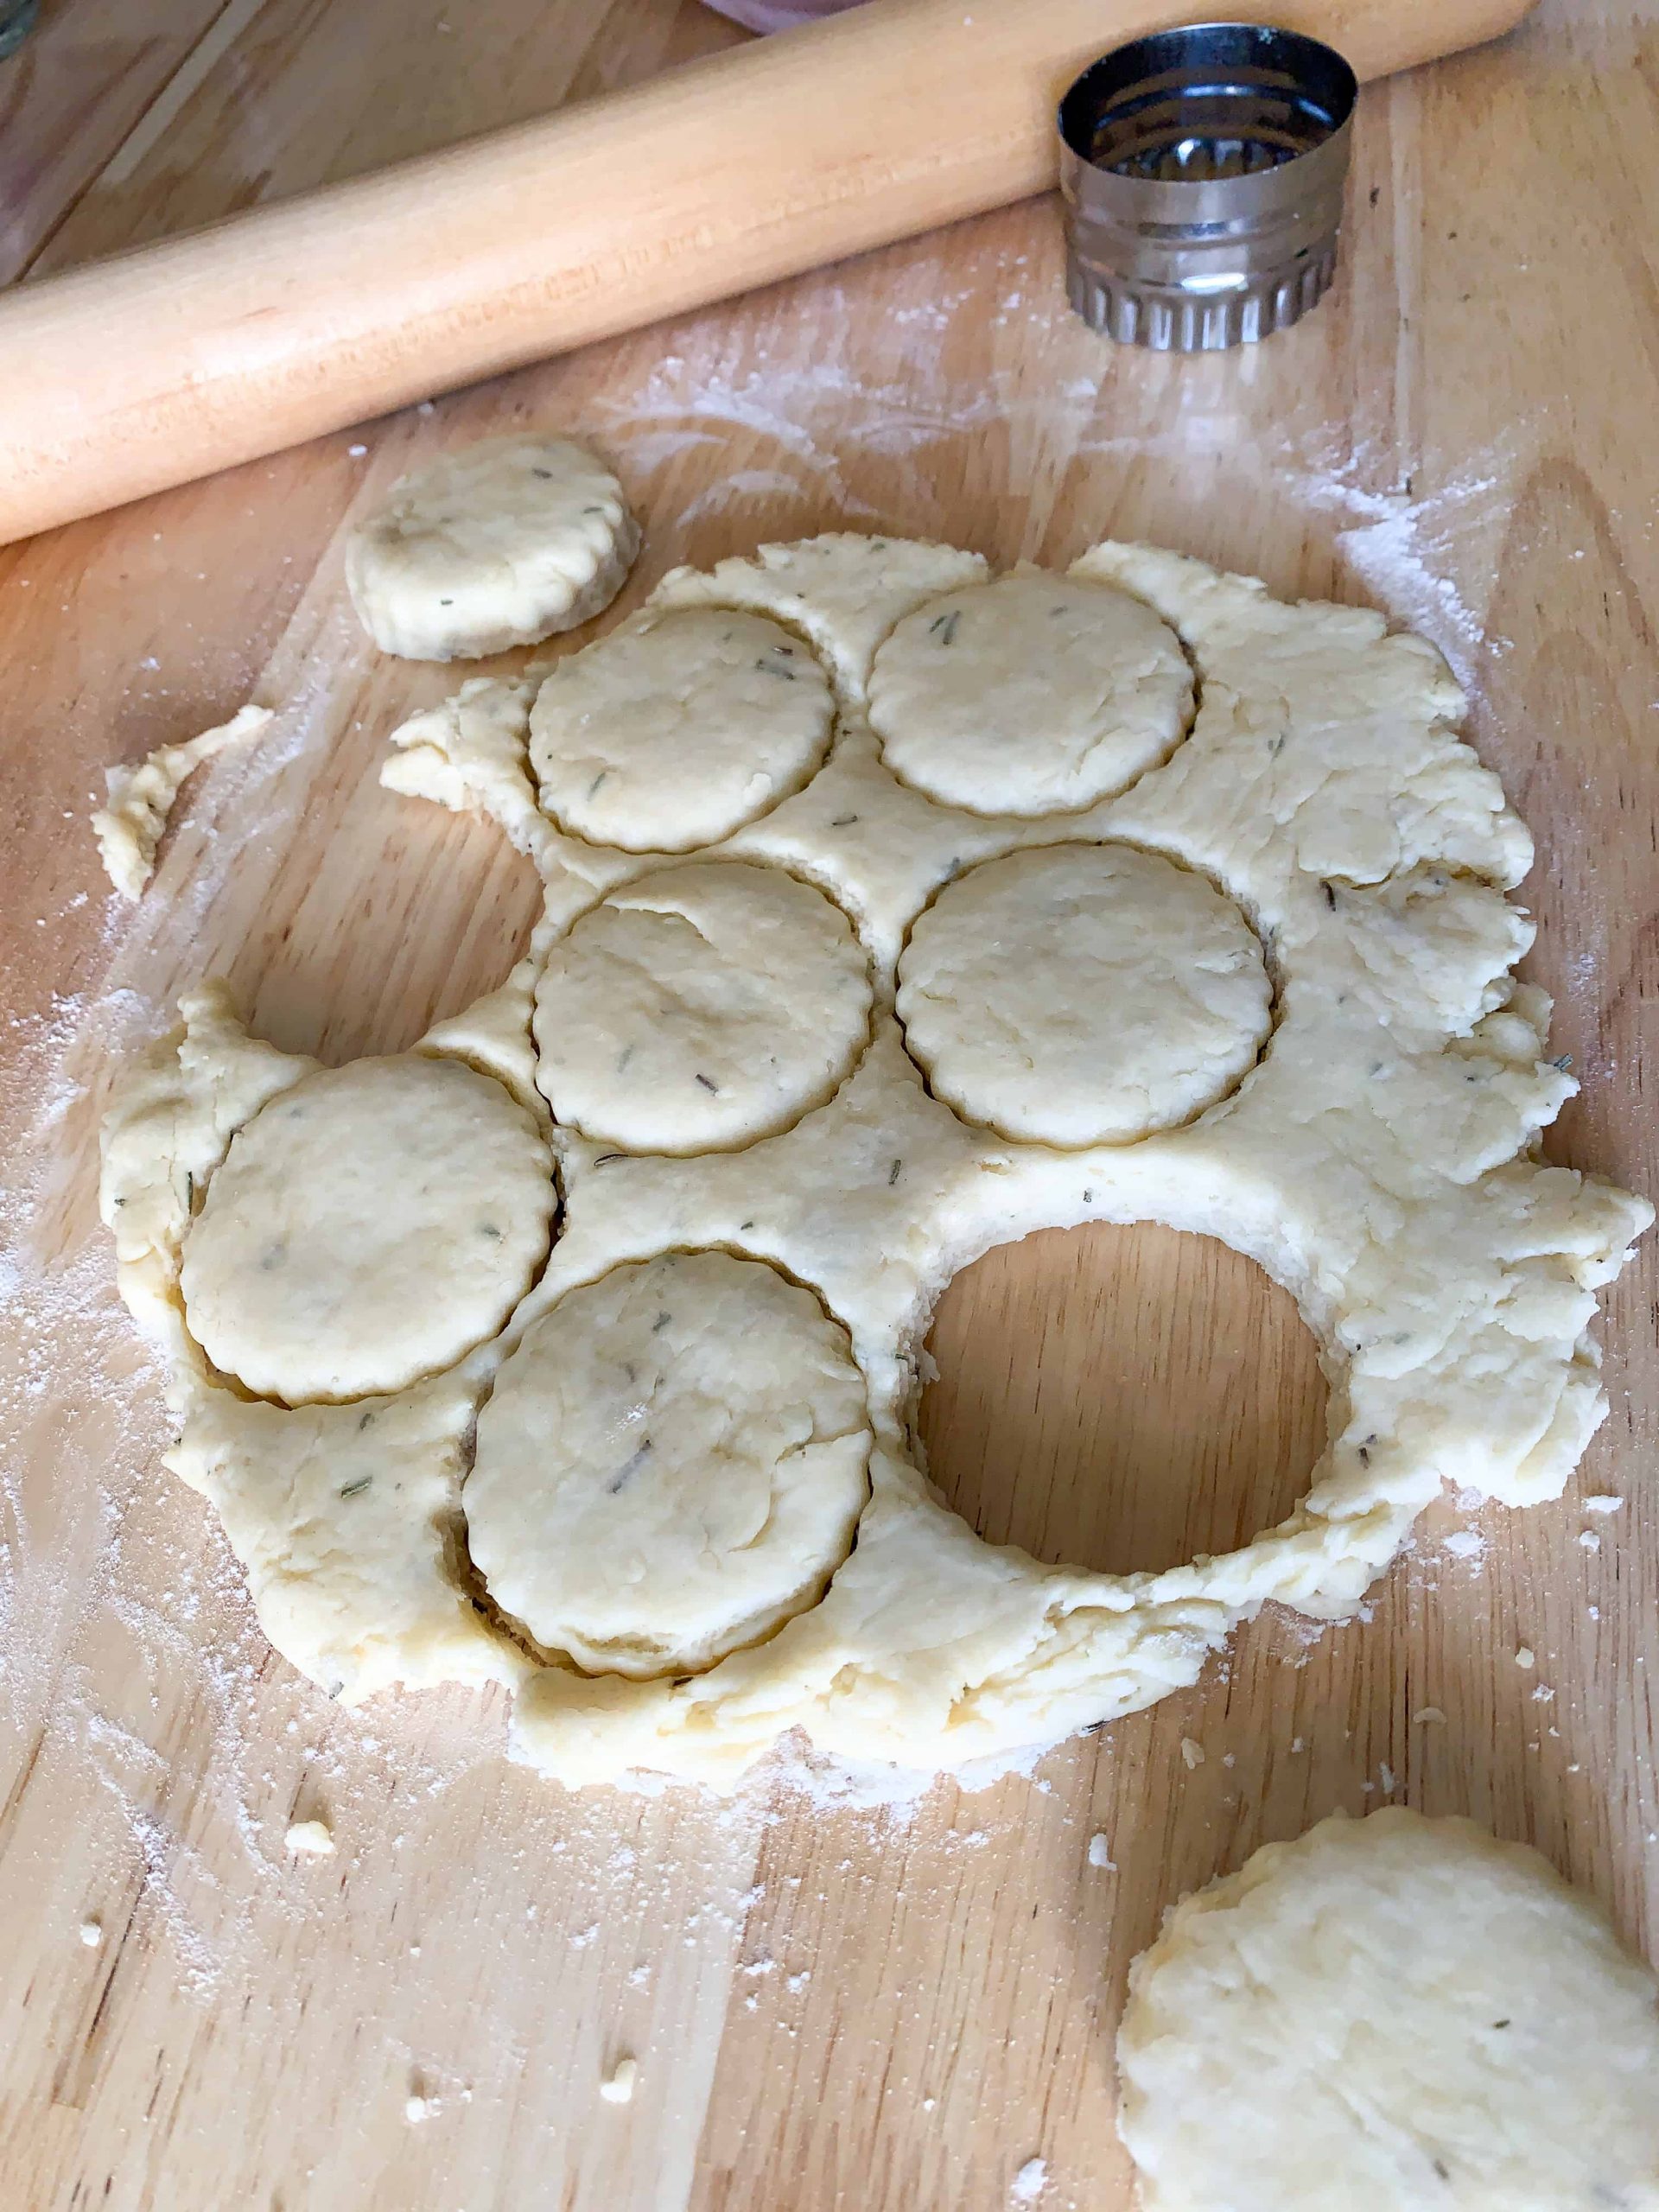 cutting out the biscuits.